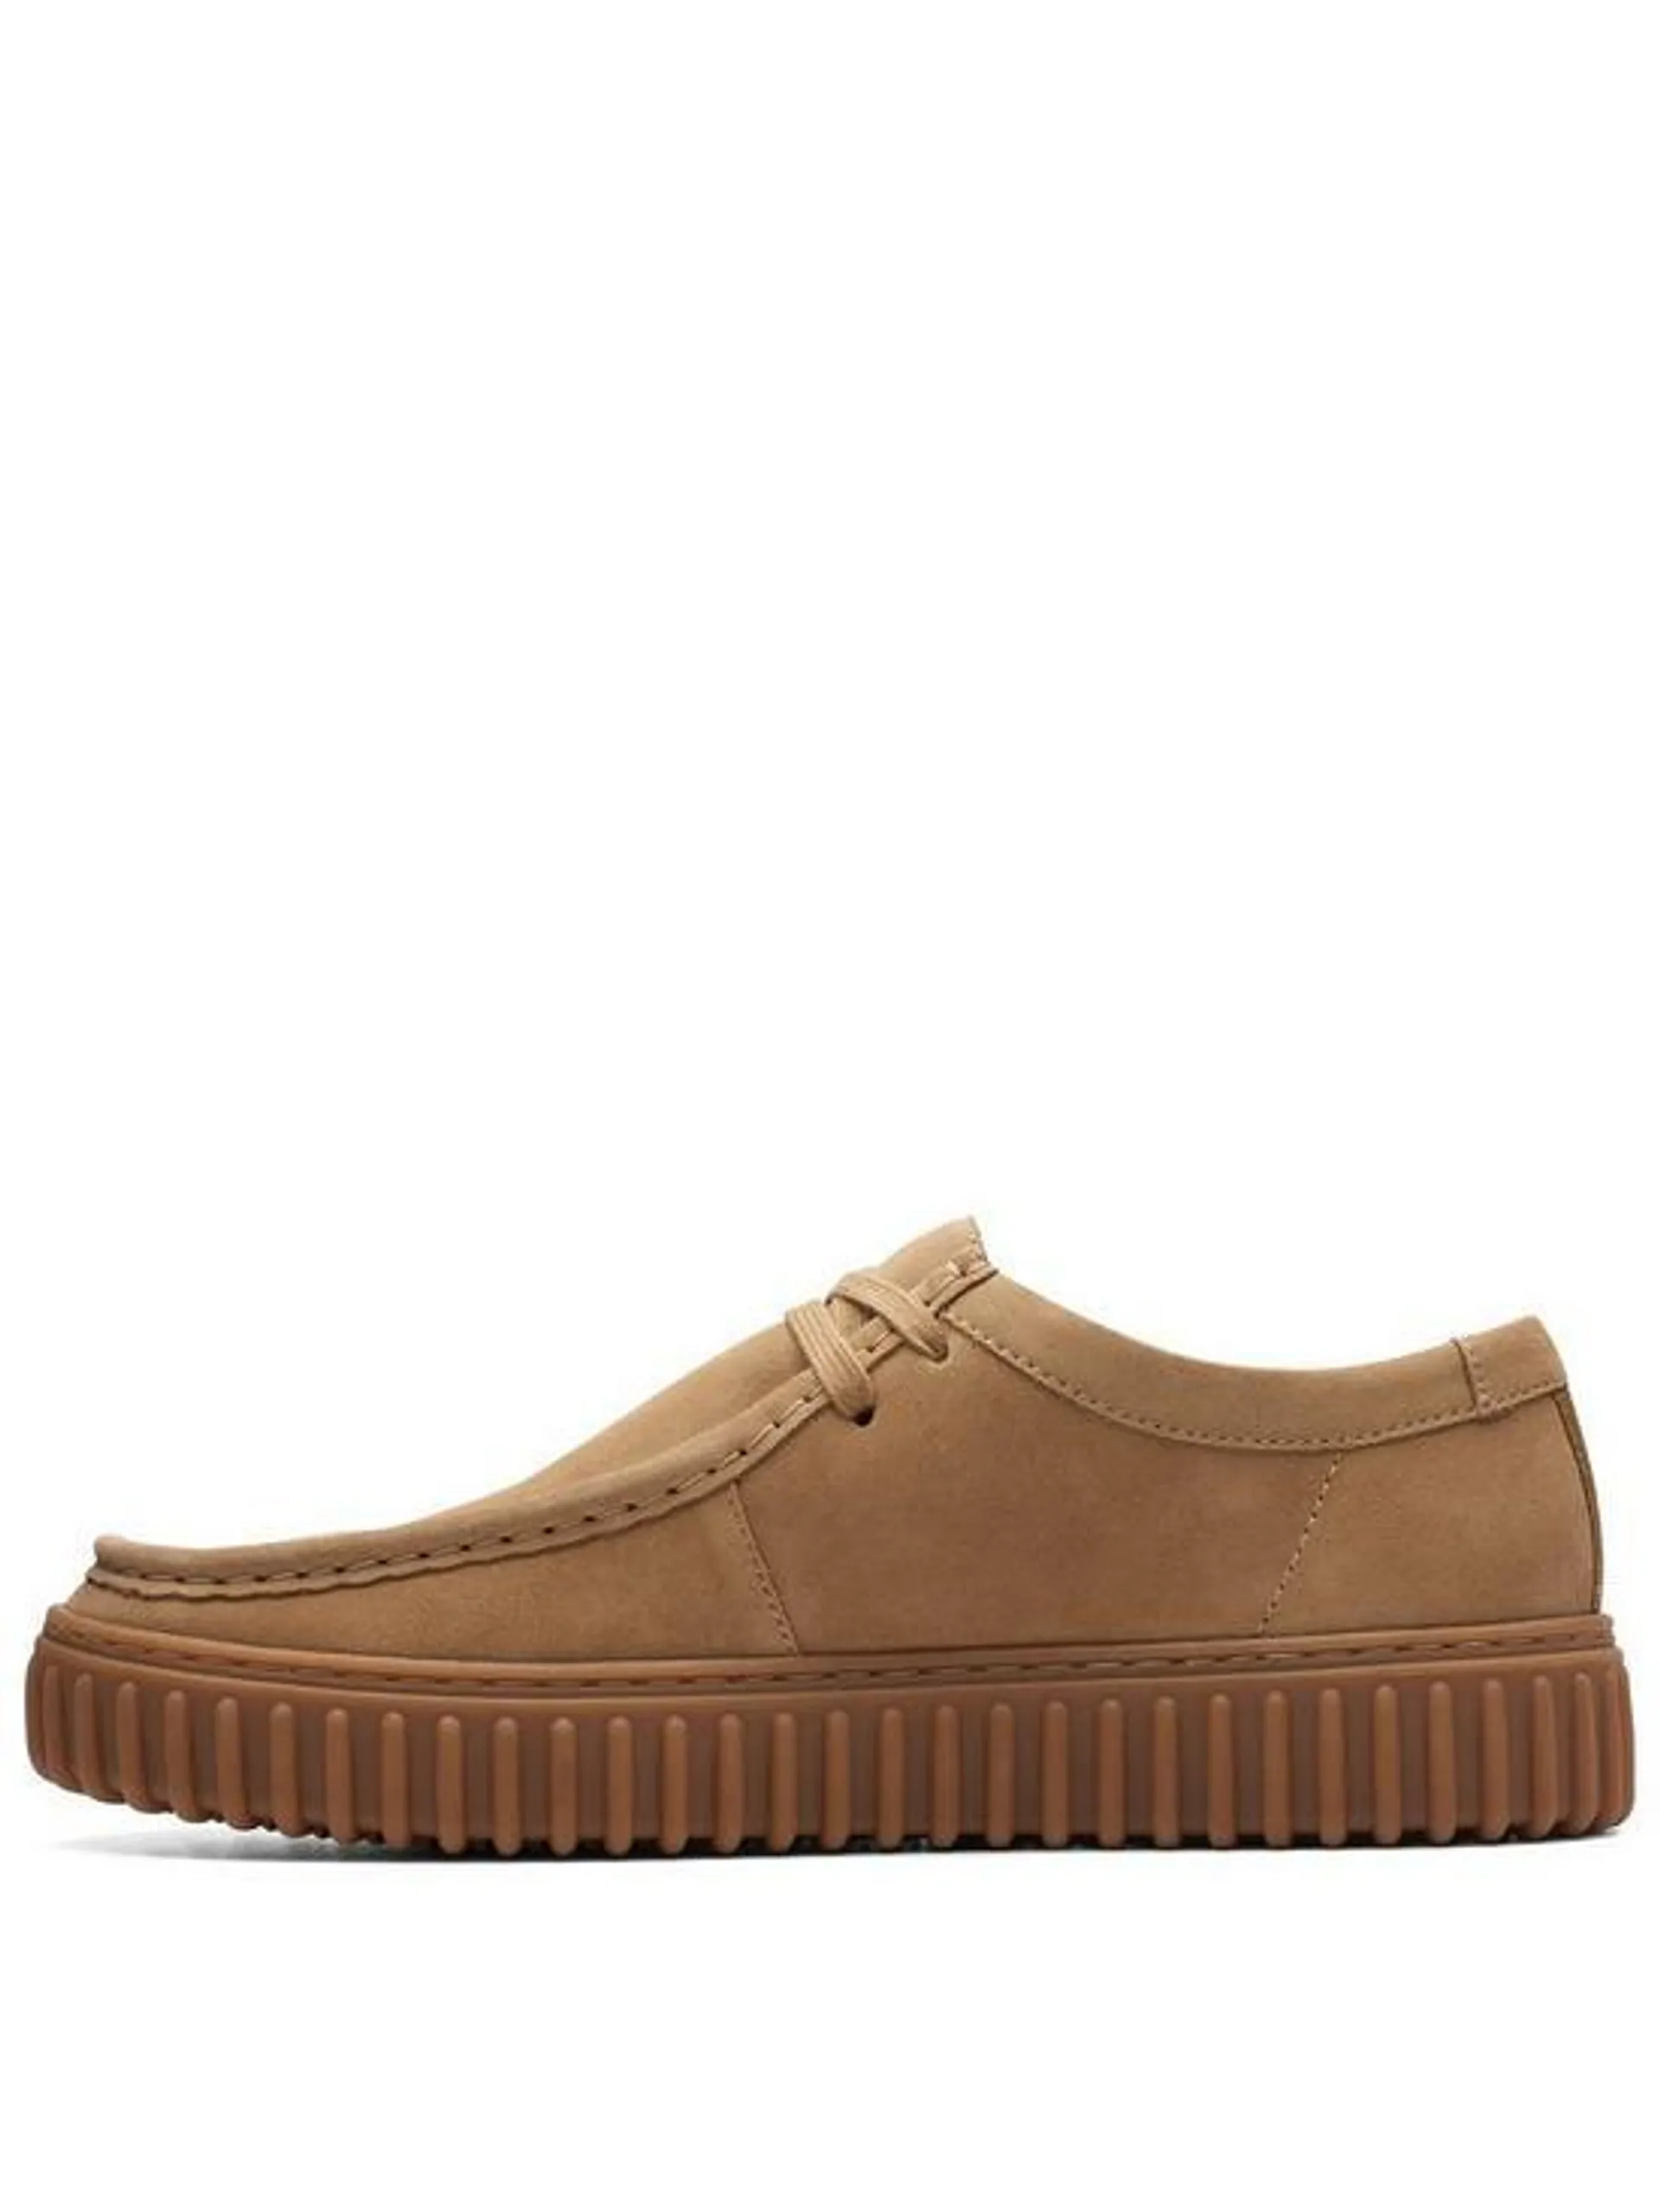 Clarks Torhill Lo Shoes